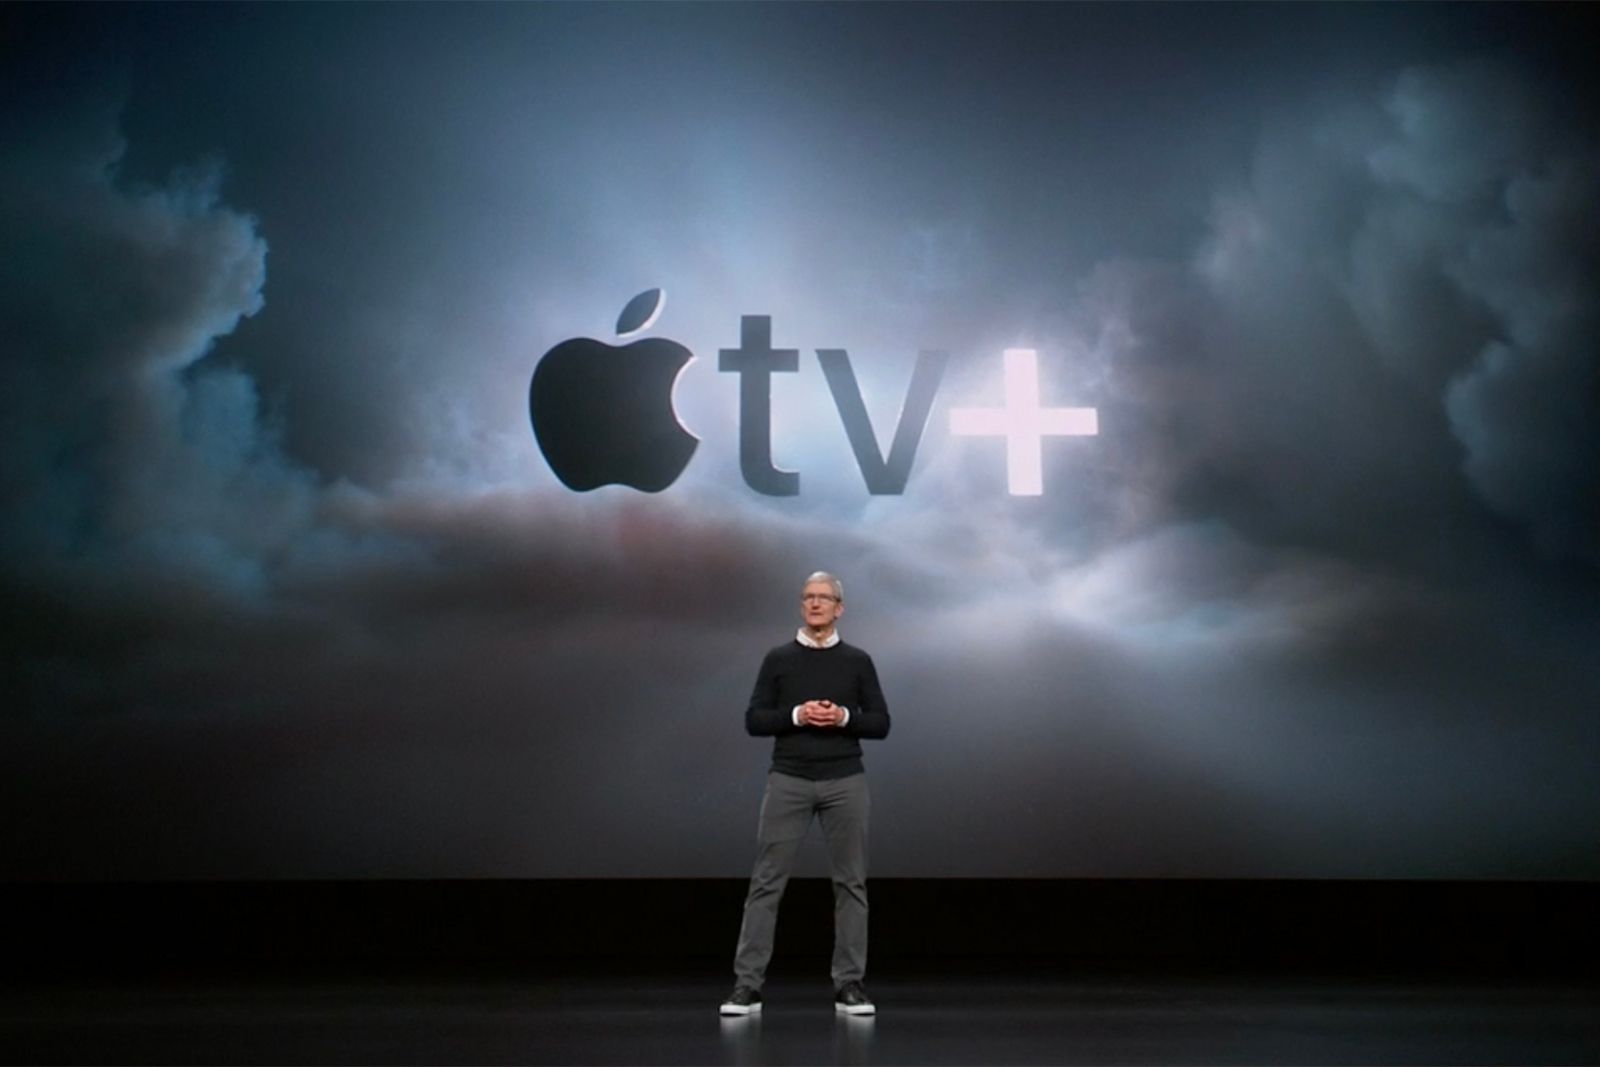 Not everything on TV will be suited for kids says Apples Eddy Cue image 1